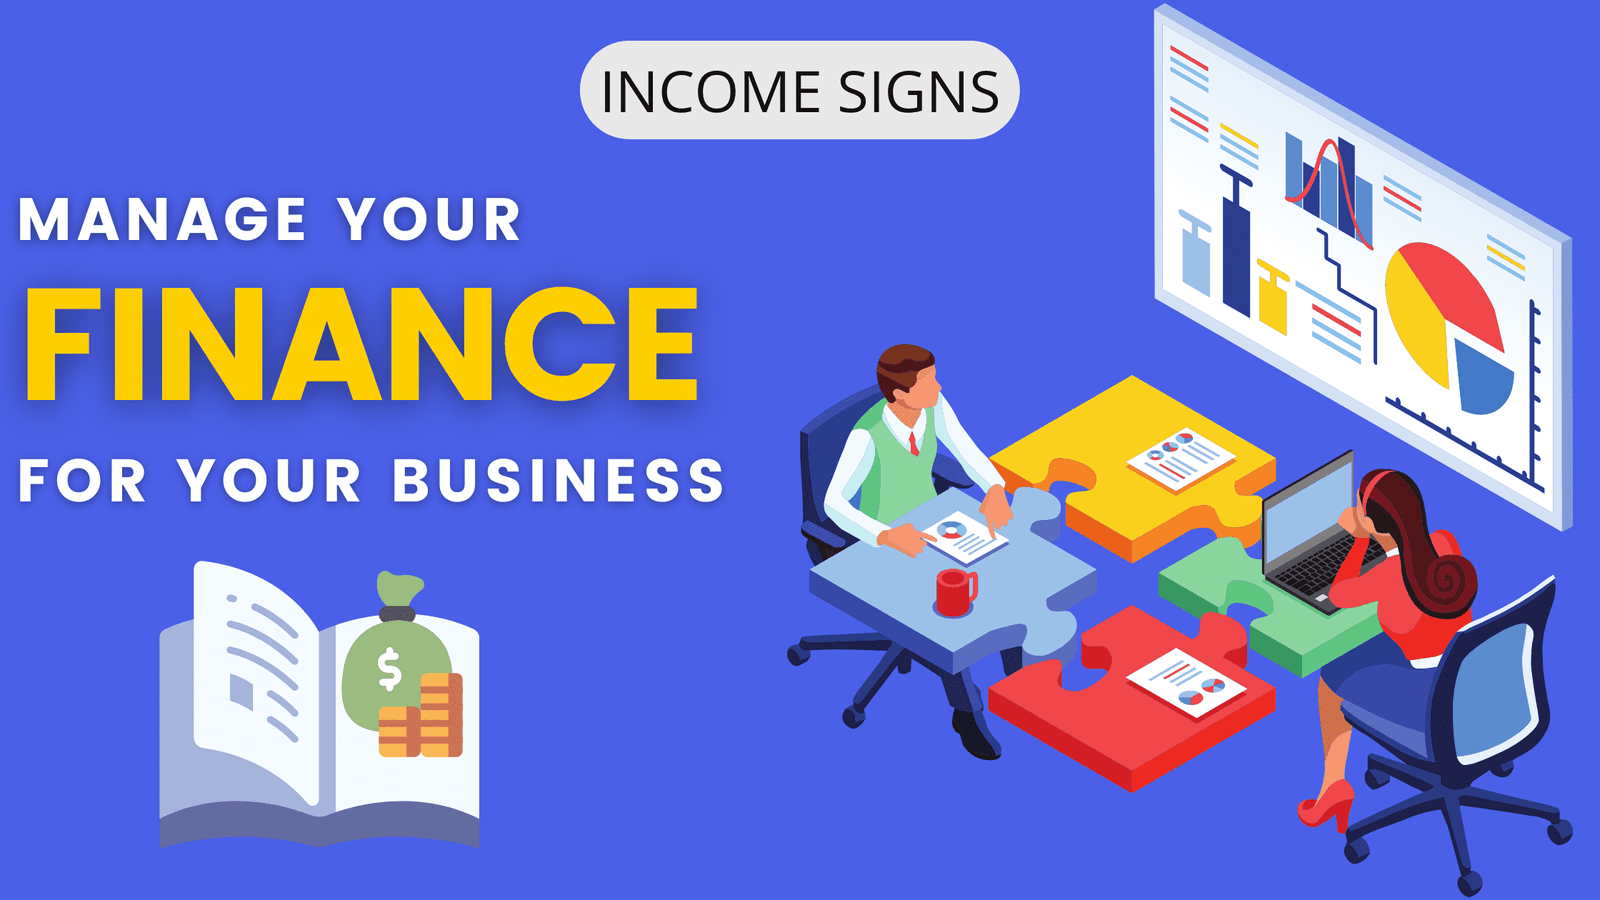 How to Manage Your Finances for Business Carefully